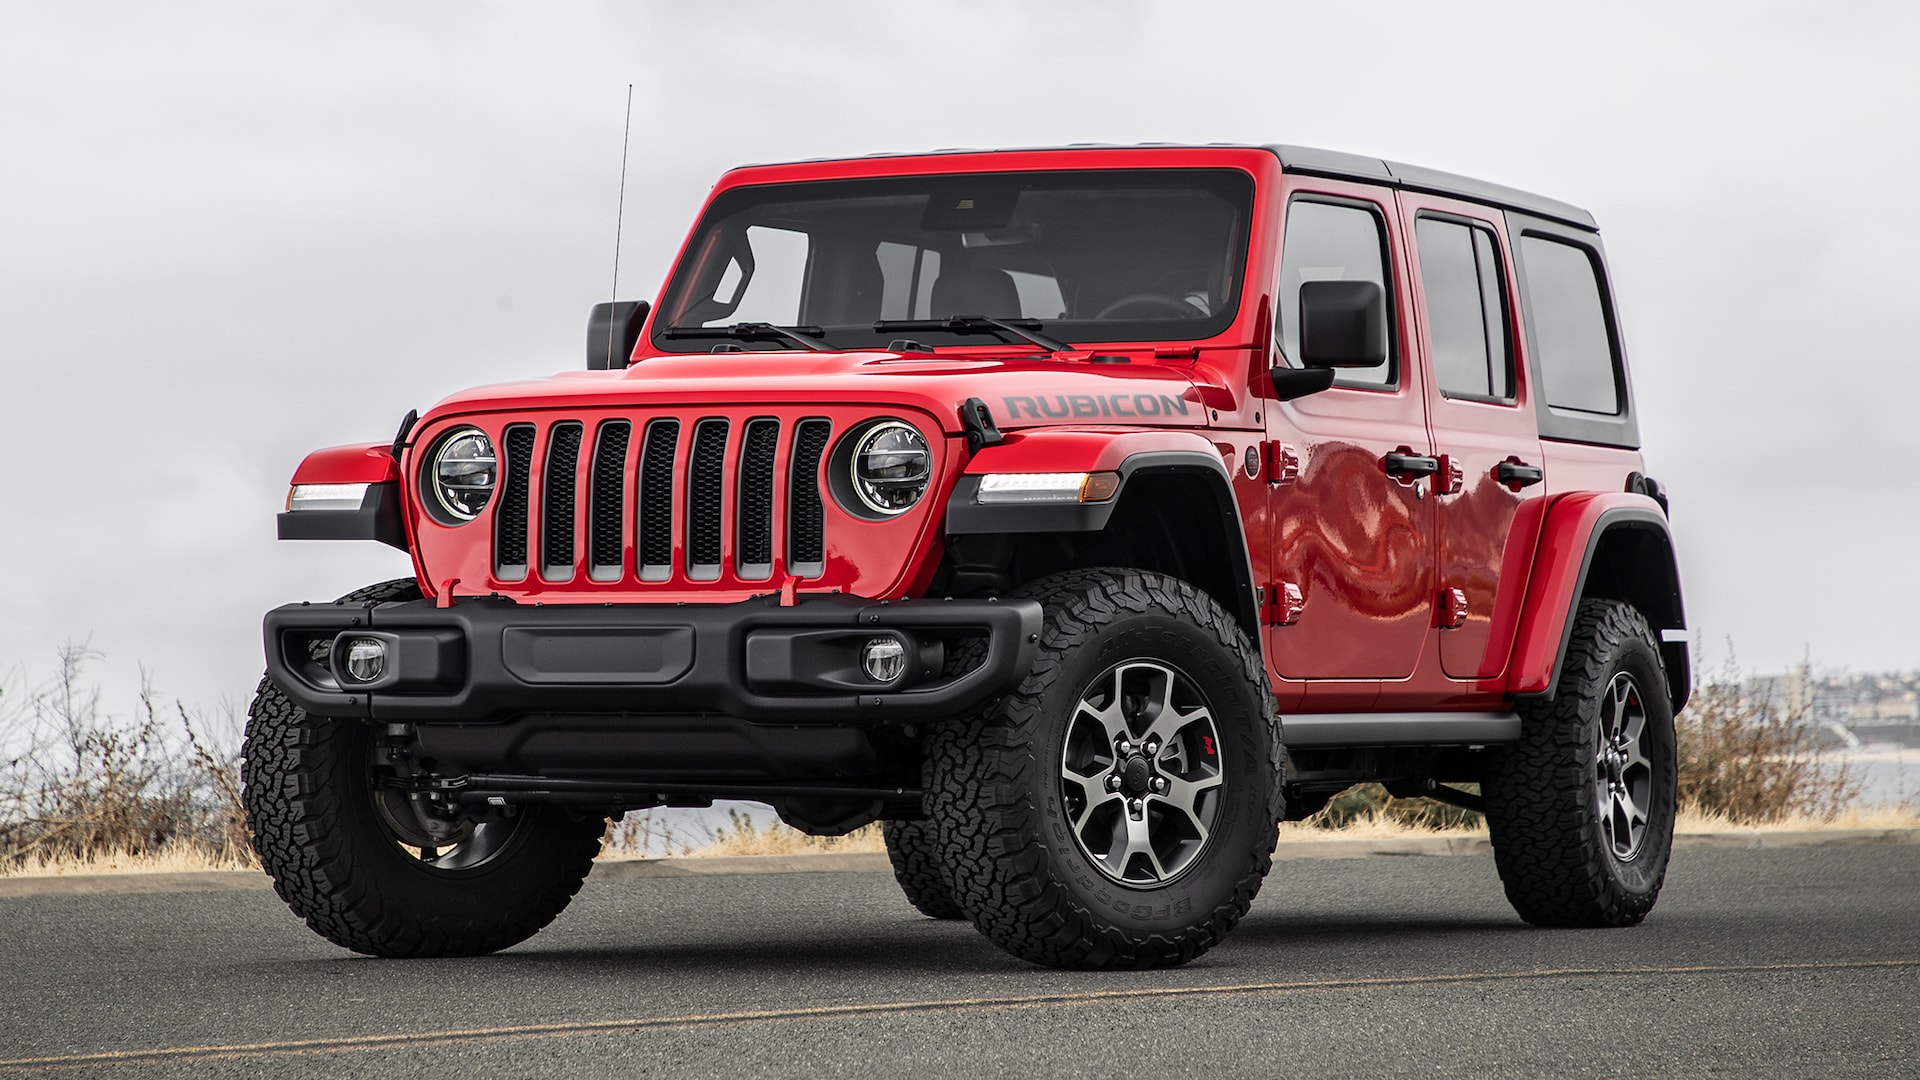 What's It Like to Live With a 2019 Jeep Wrangler? We're About to Find Out